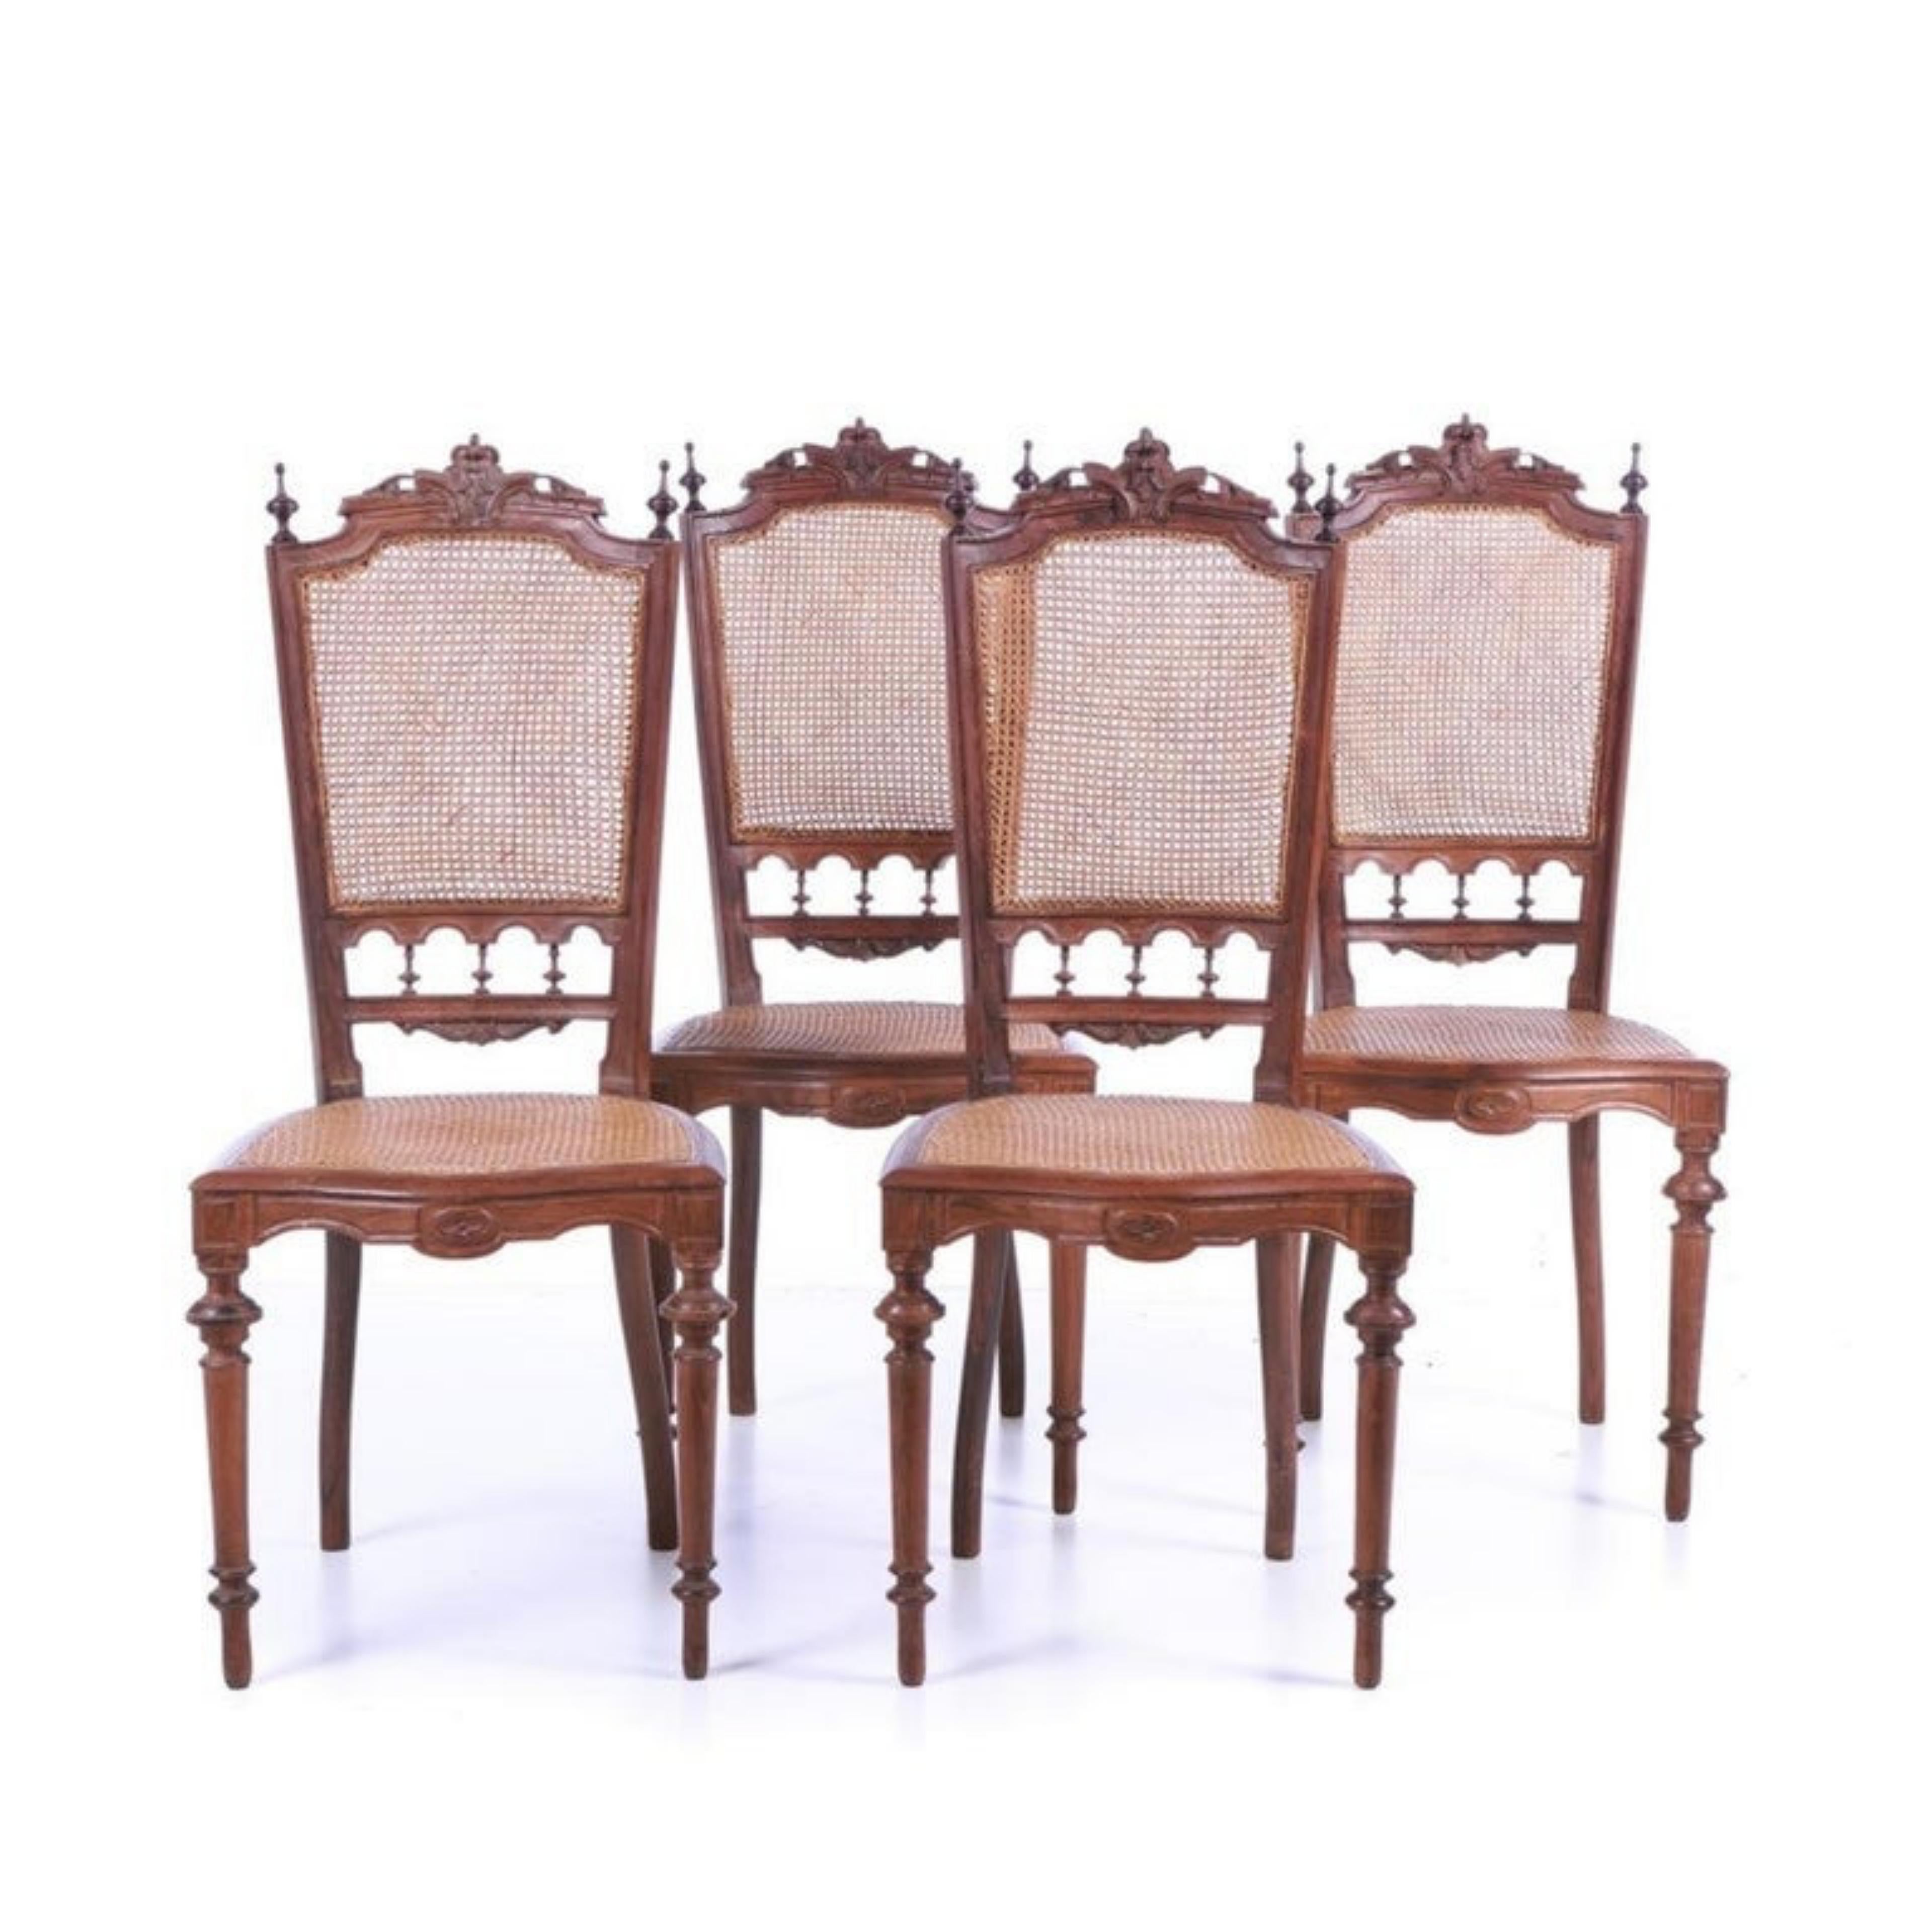 Hand-Crafted 4 Portuguese Chairs 19th Century in Brazilian Rosewood For Sale